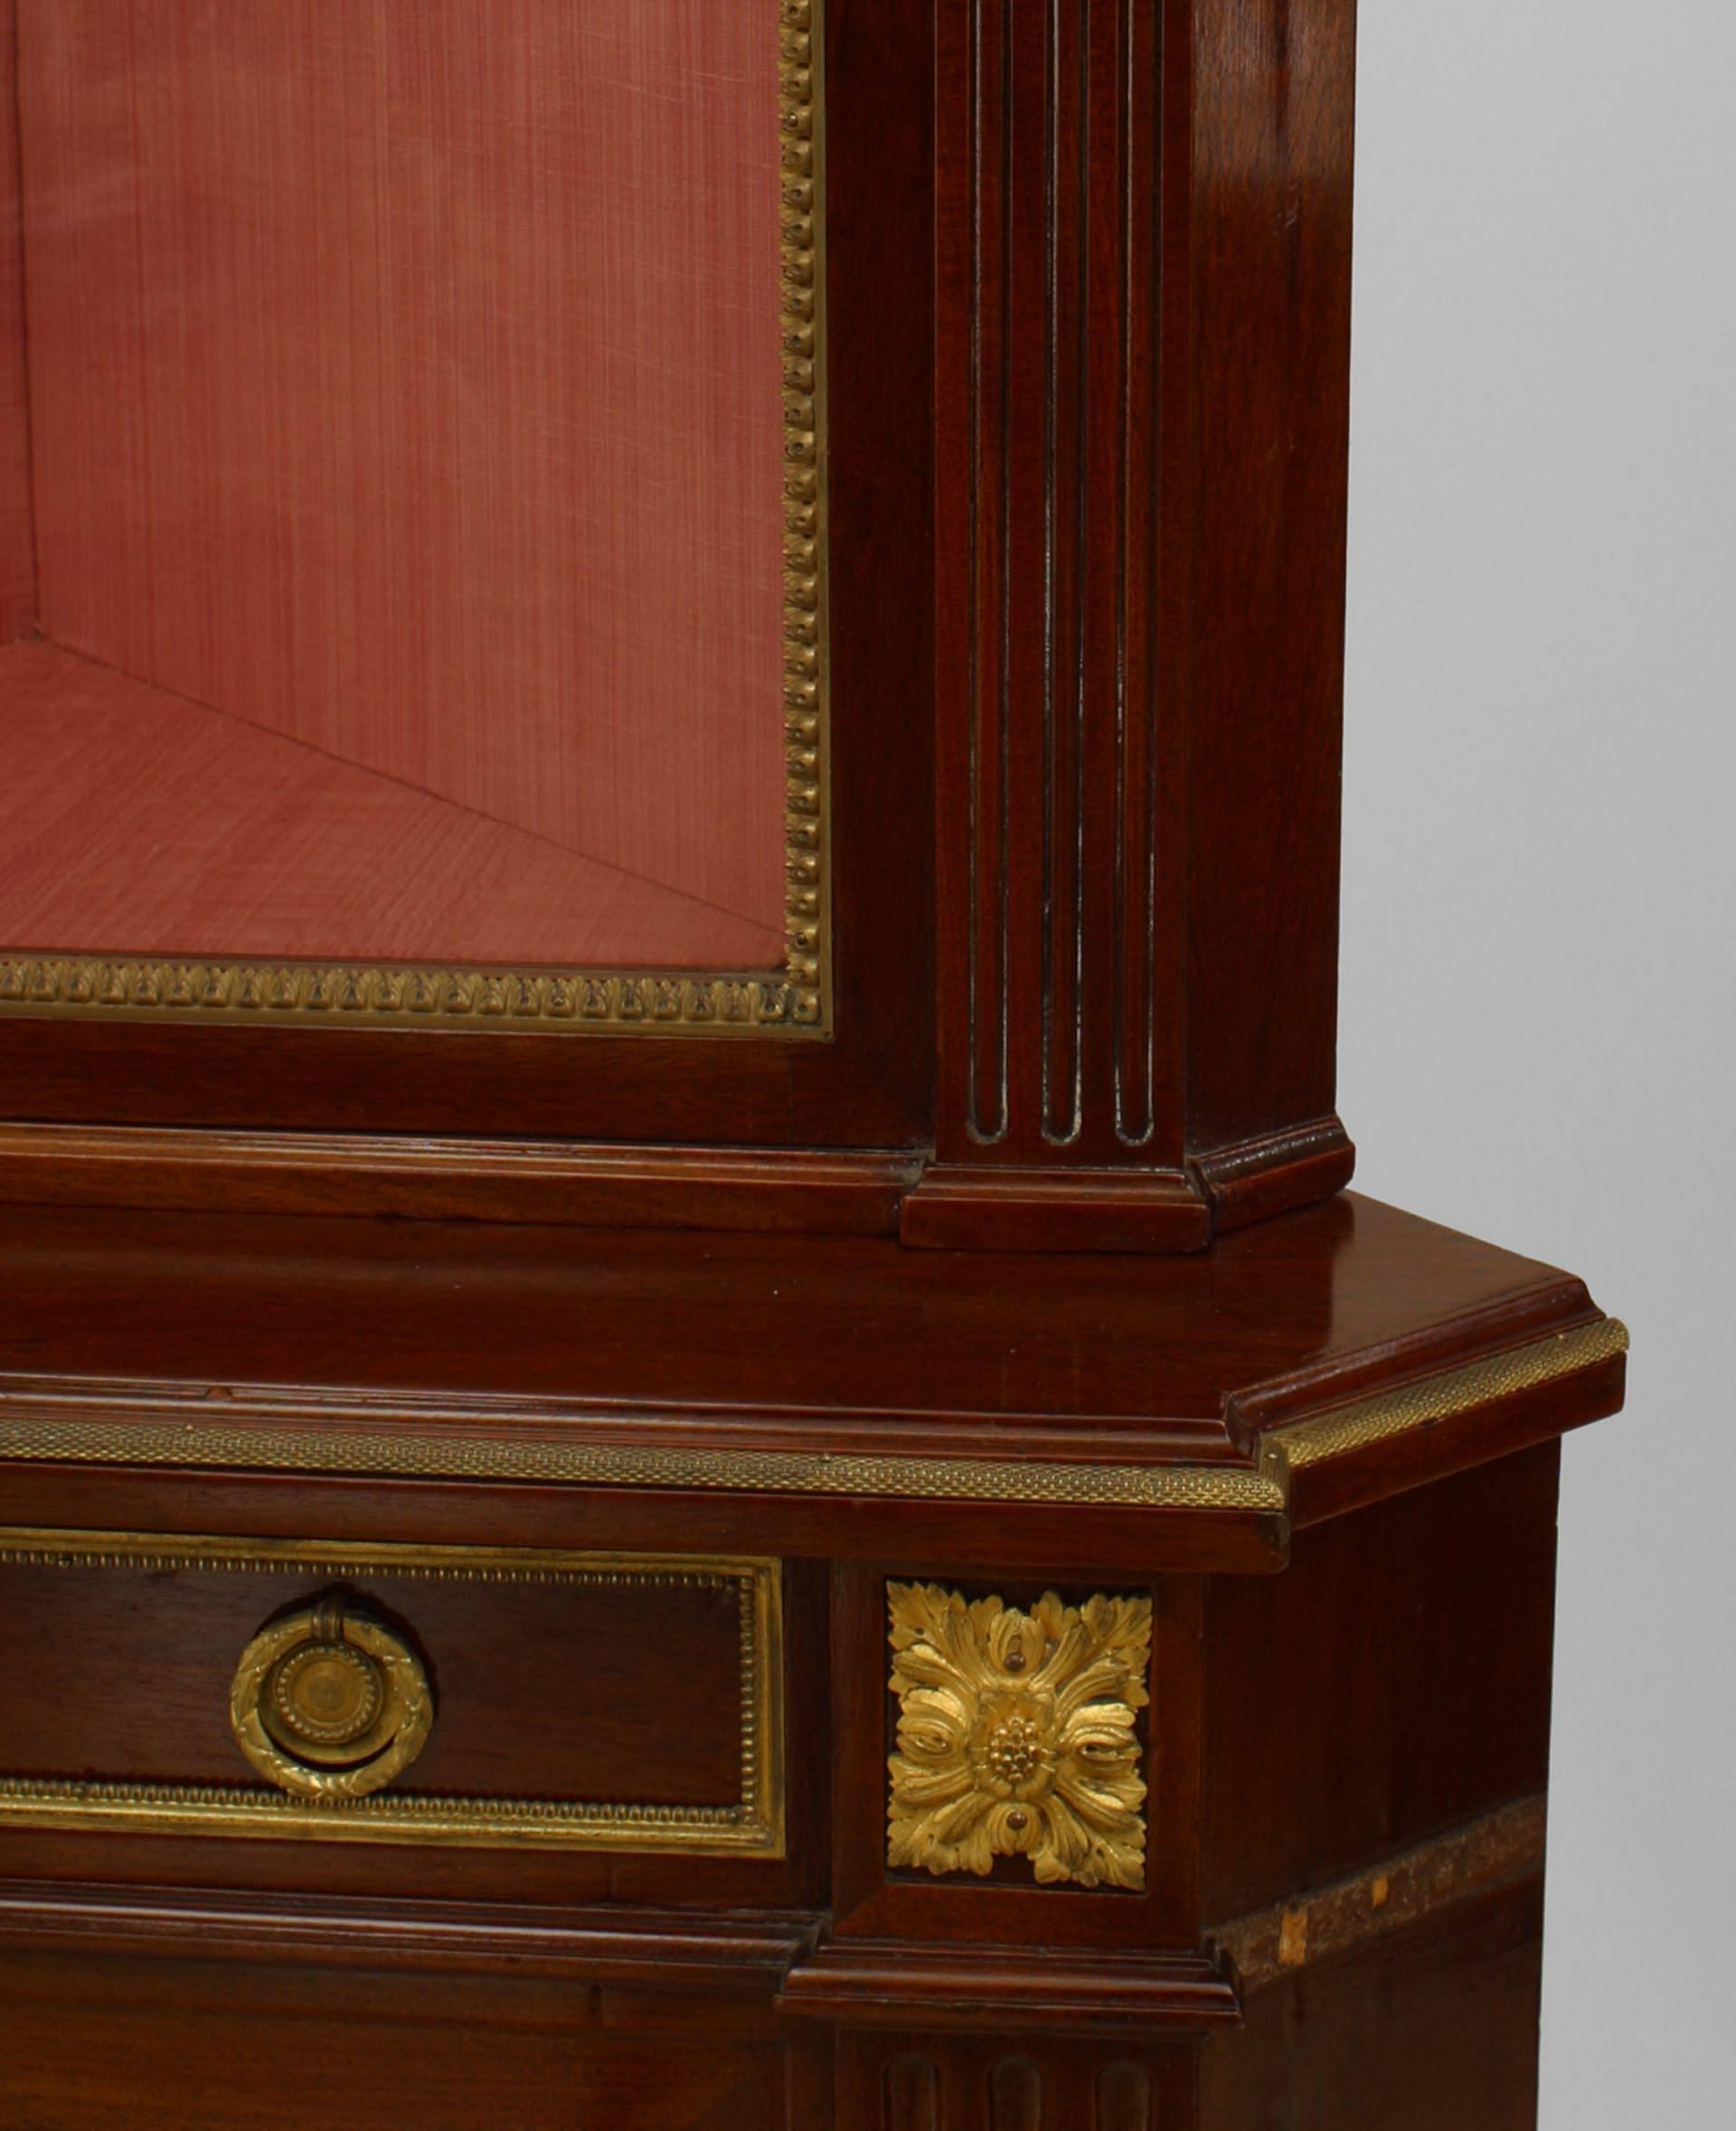 French Louis XVI-style (19th Century) mahogany 2 section corner cabinet with gilt bronze trim and a glass door upper section and a lower section with a drawer and brass grill door
